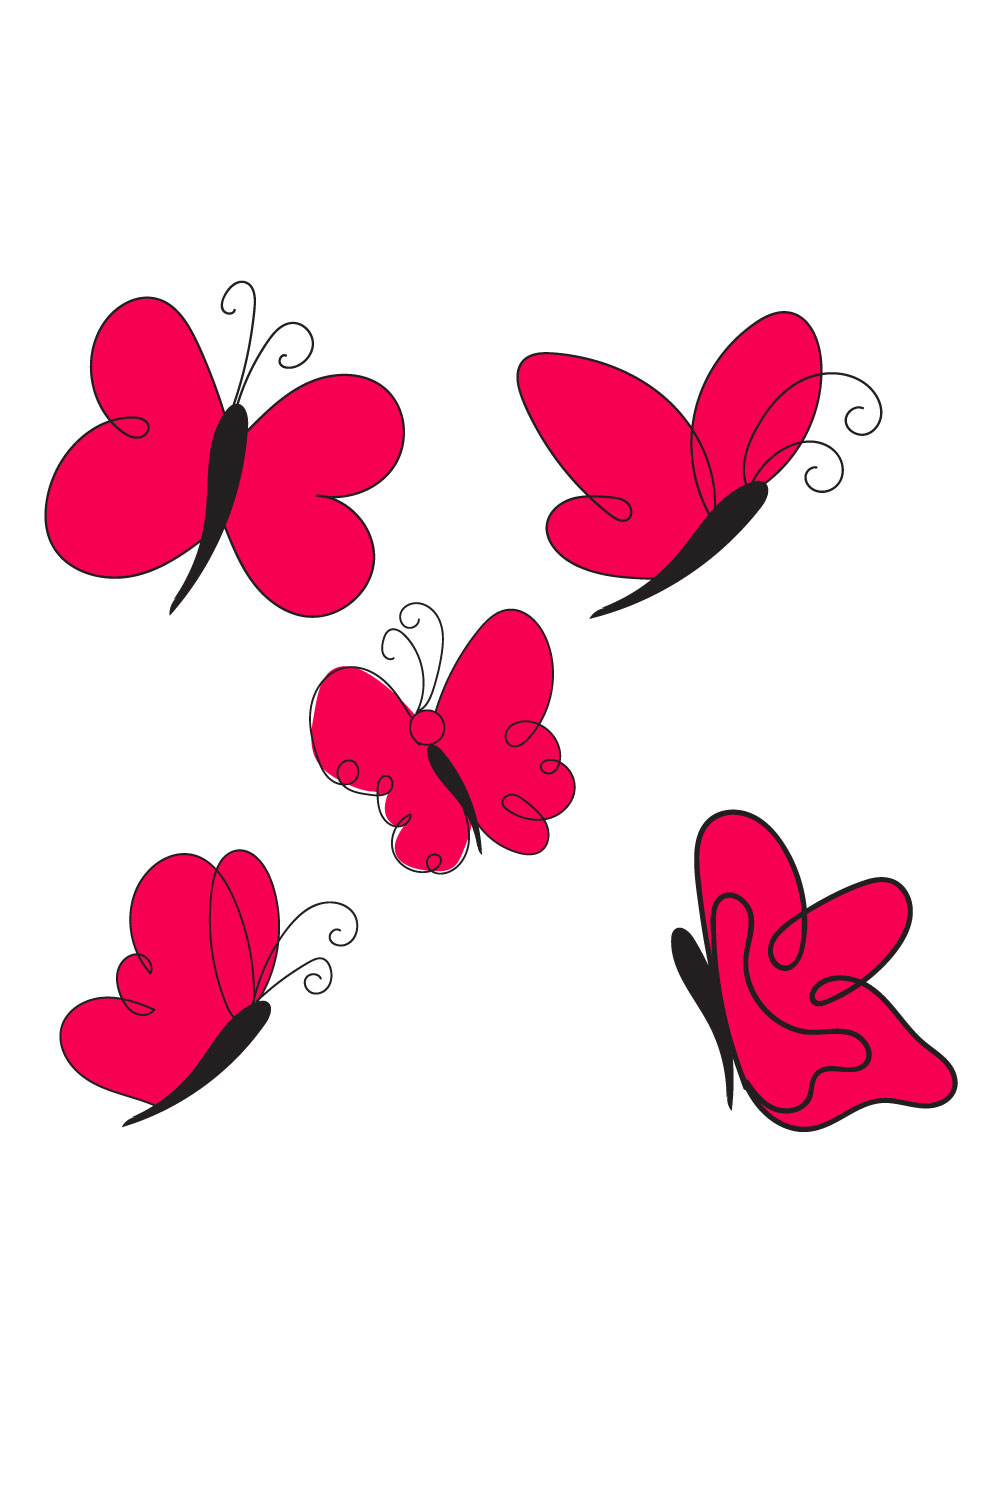 Group of red butterflies flying through the air.